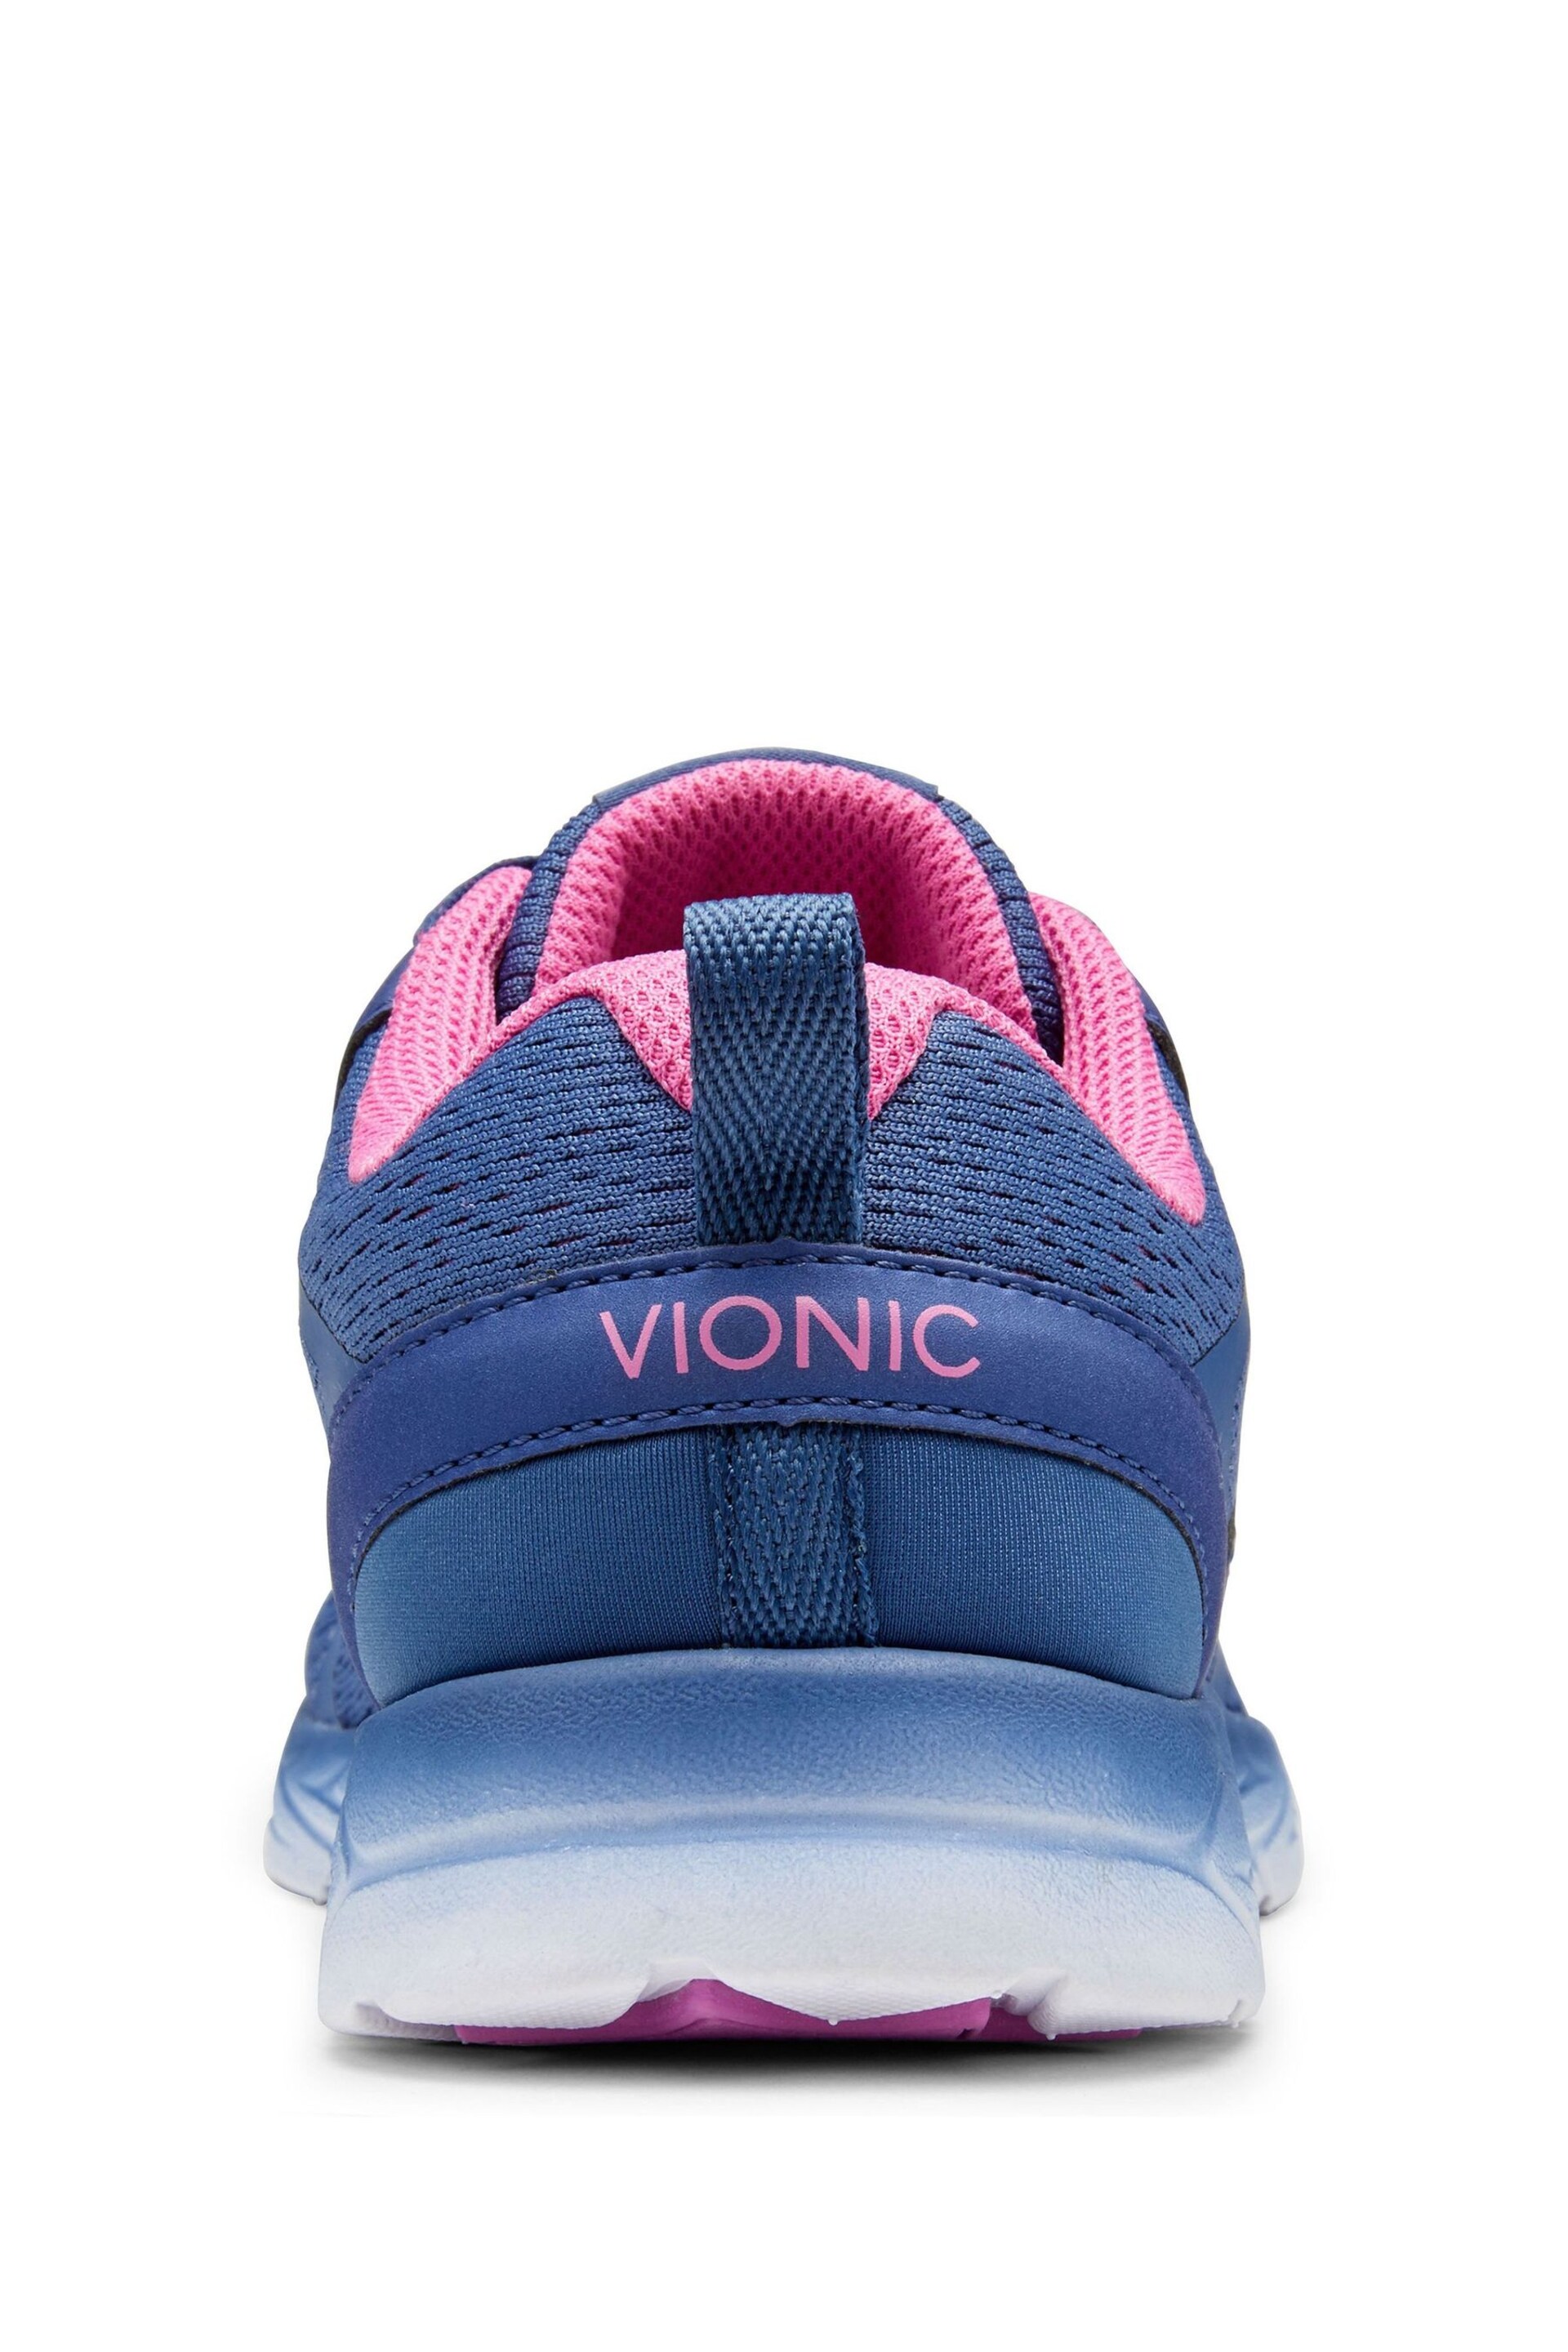 Vionic Miles Sneaker Trainers - Image 5 of 5